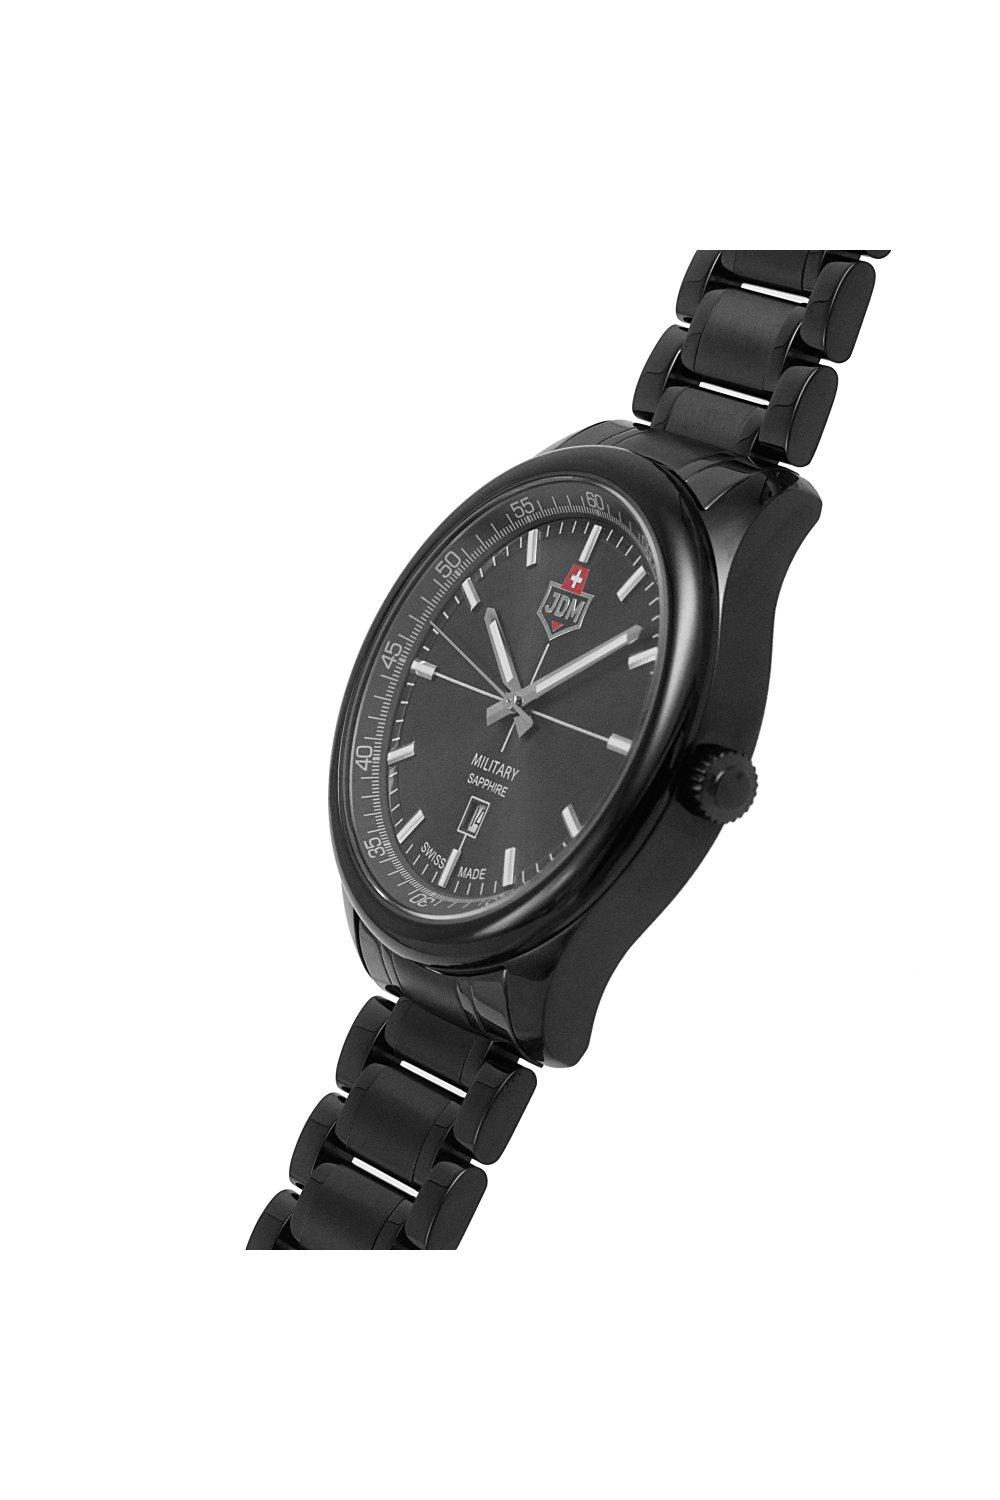 JDM Military (Jacques Du Manoir) - WG010-01 - Alpha Mission - Made In Switzerland - Wrist Watch for Men - 10 ATM